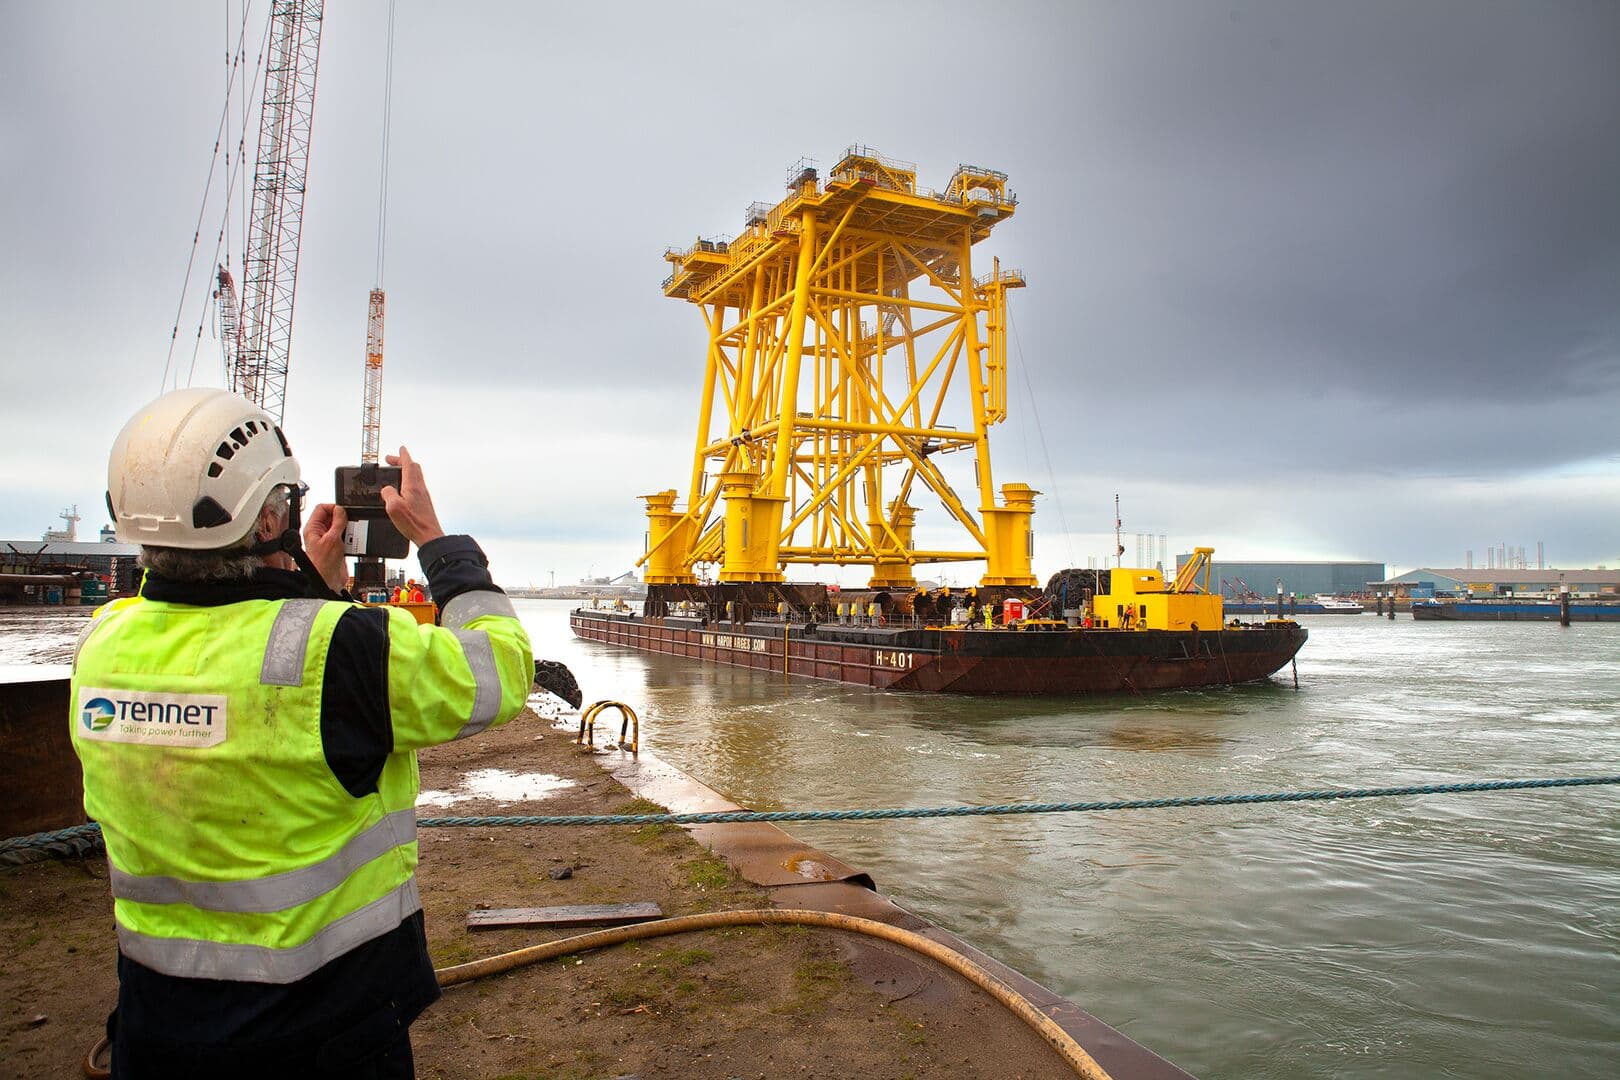 Man taking photo of Offshore Project Sail away jacket HKN hollandse kust noord